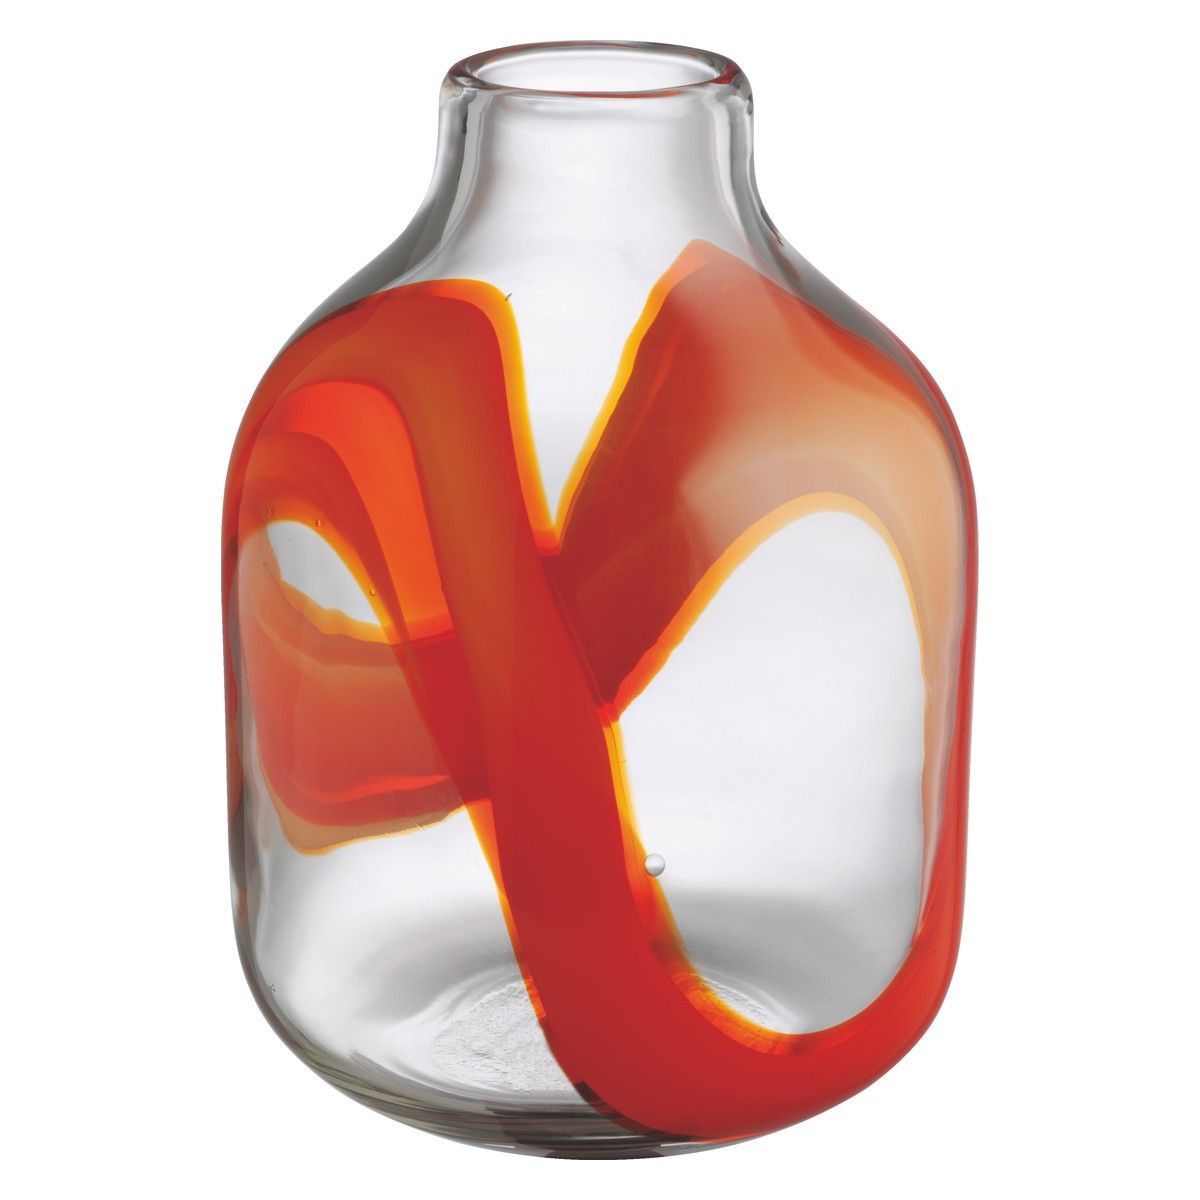 28 Awesome Large Round Clear Glass Vase 2023 free download large round clear glass vase of zoom lens buy pinterest orange pattern clear glass vases and regarding decorated with a ribbon of vibrant colour the marmo clear glass vase with orange patter